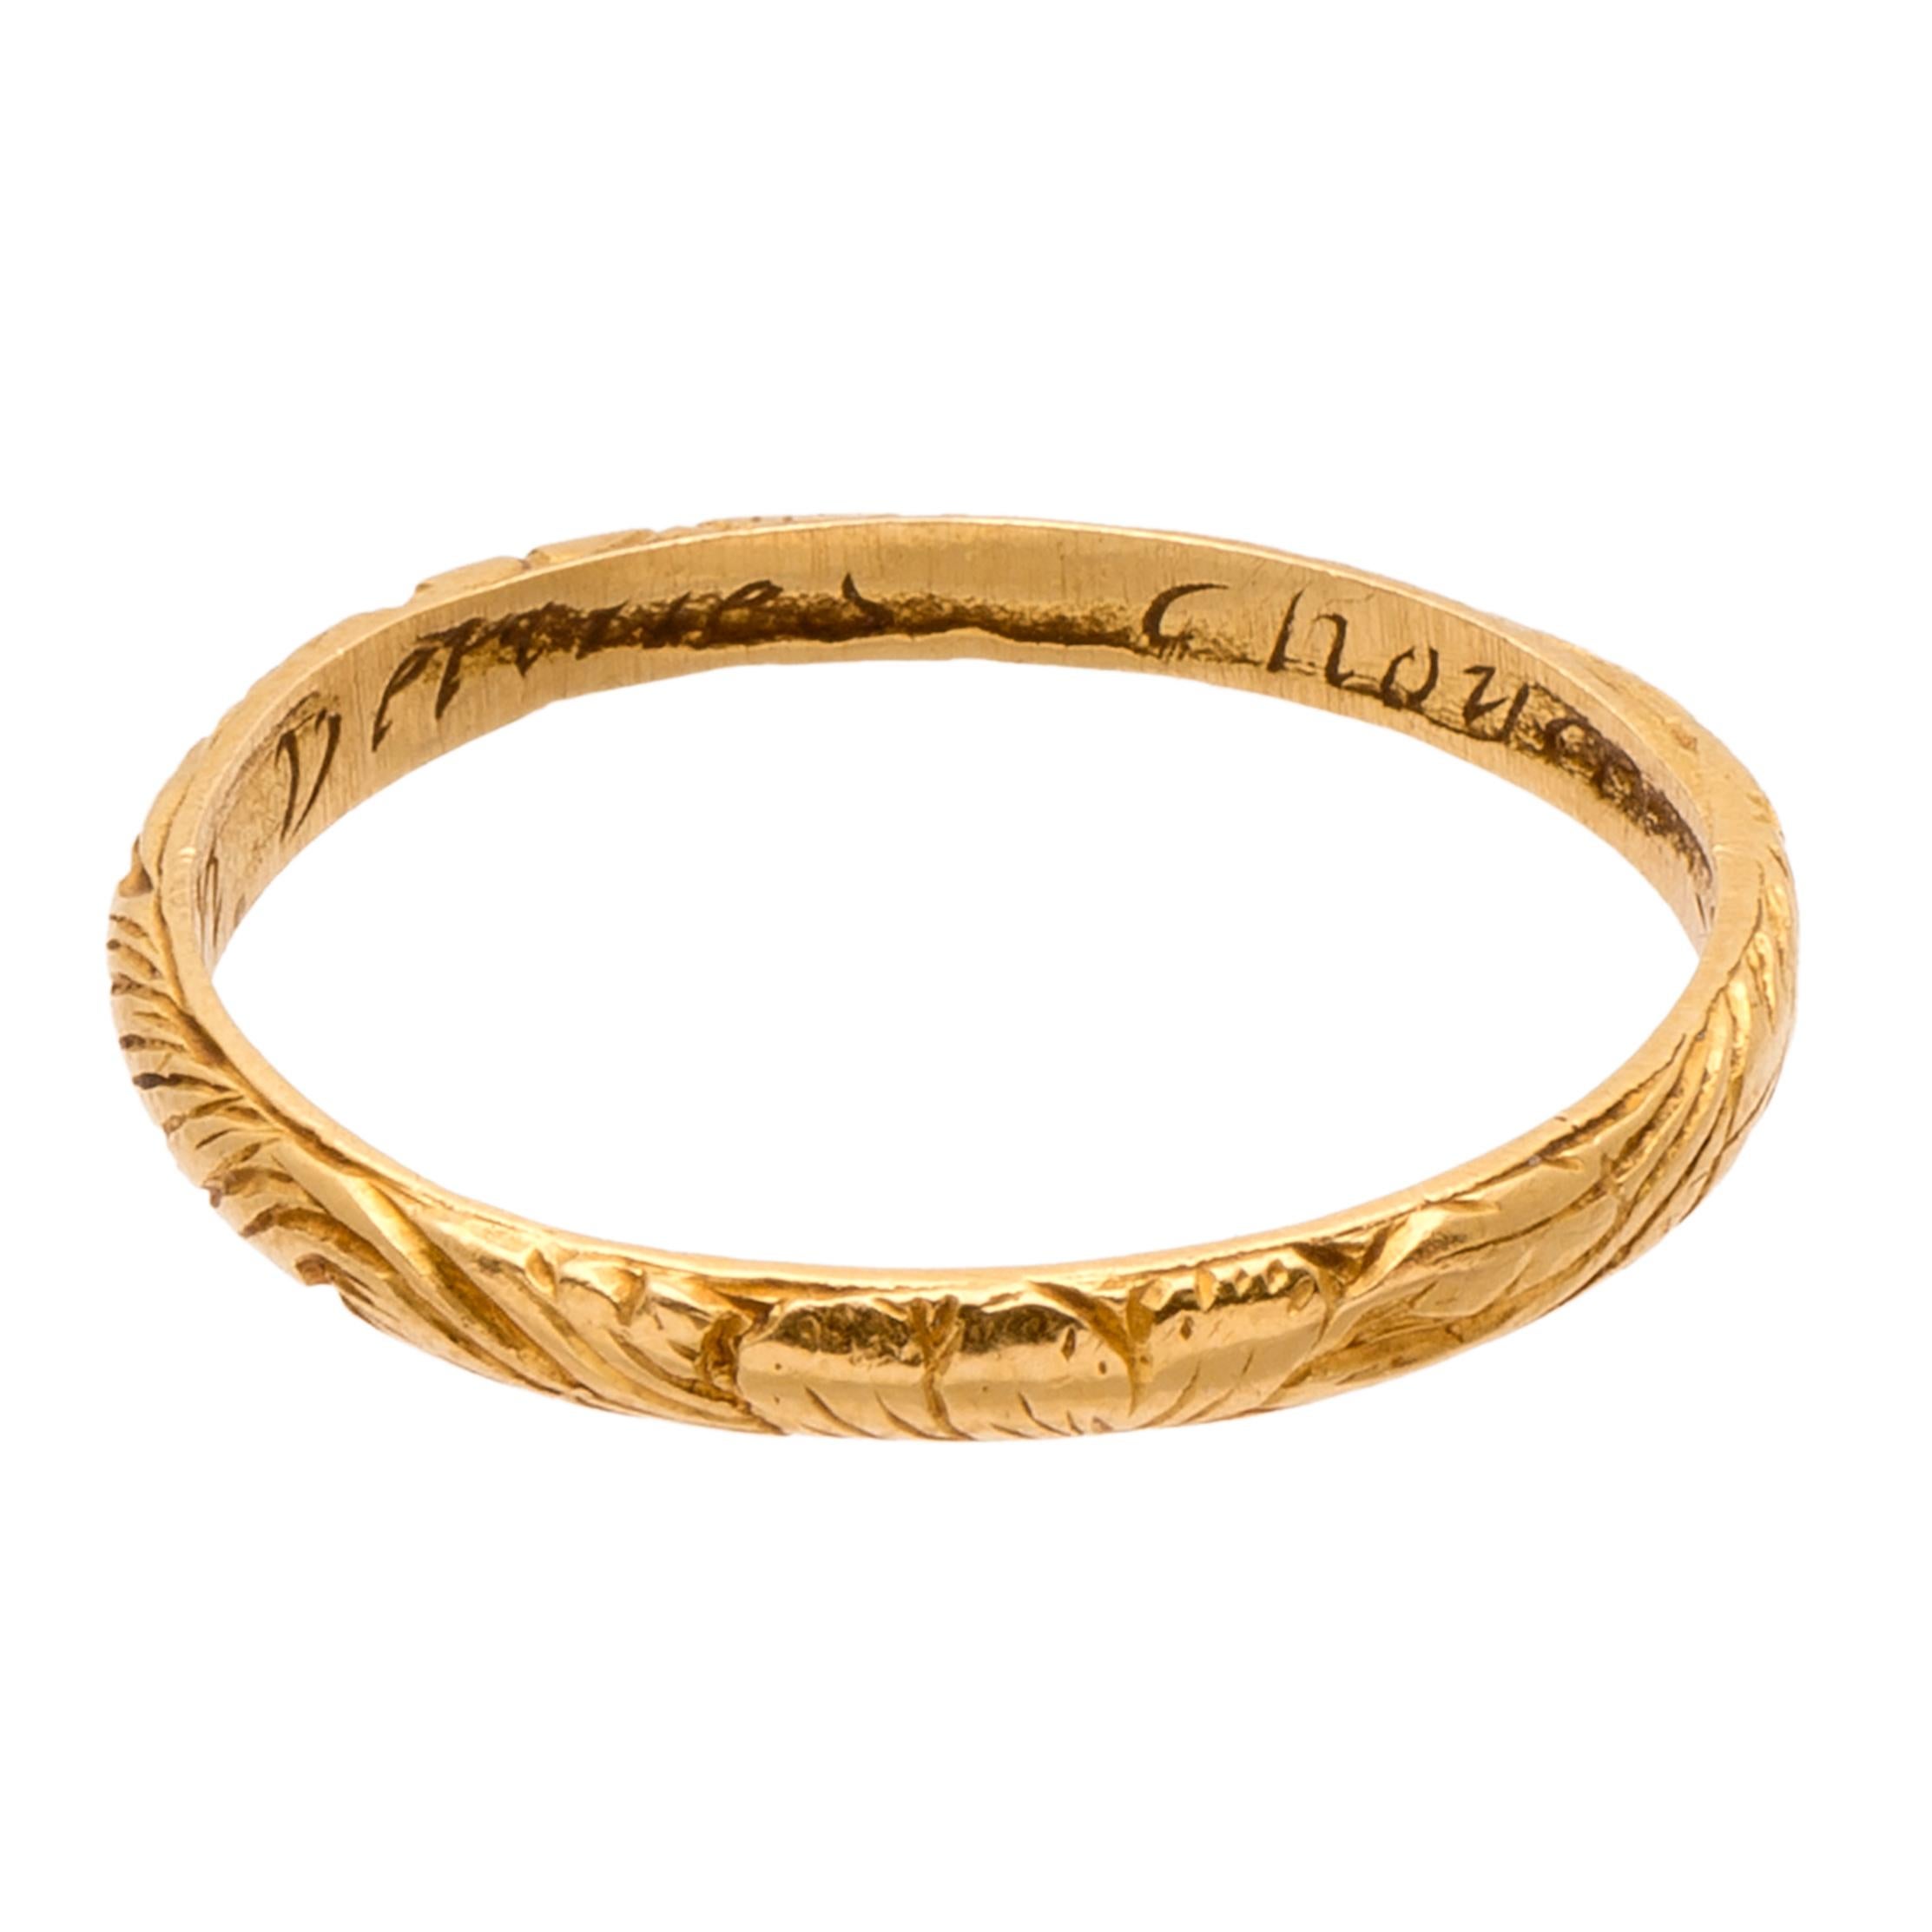 Posy ring, “No Cheigne in Vertues Choyse” (No change in virtue’s choice)
England, 16th-17th century
Gold
Weight 1.8 gr.; circumference 54.51 mm.; US size 7; UK size O

Rings with amatory mottos and inscriptions were known as “posy rings,” a term